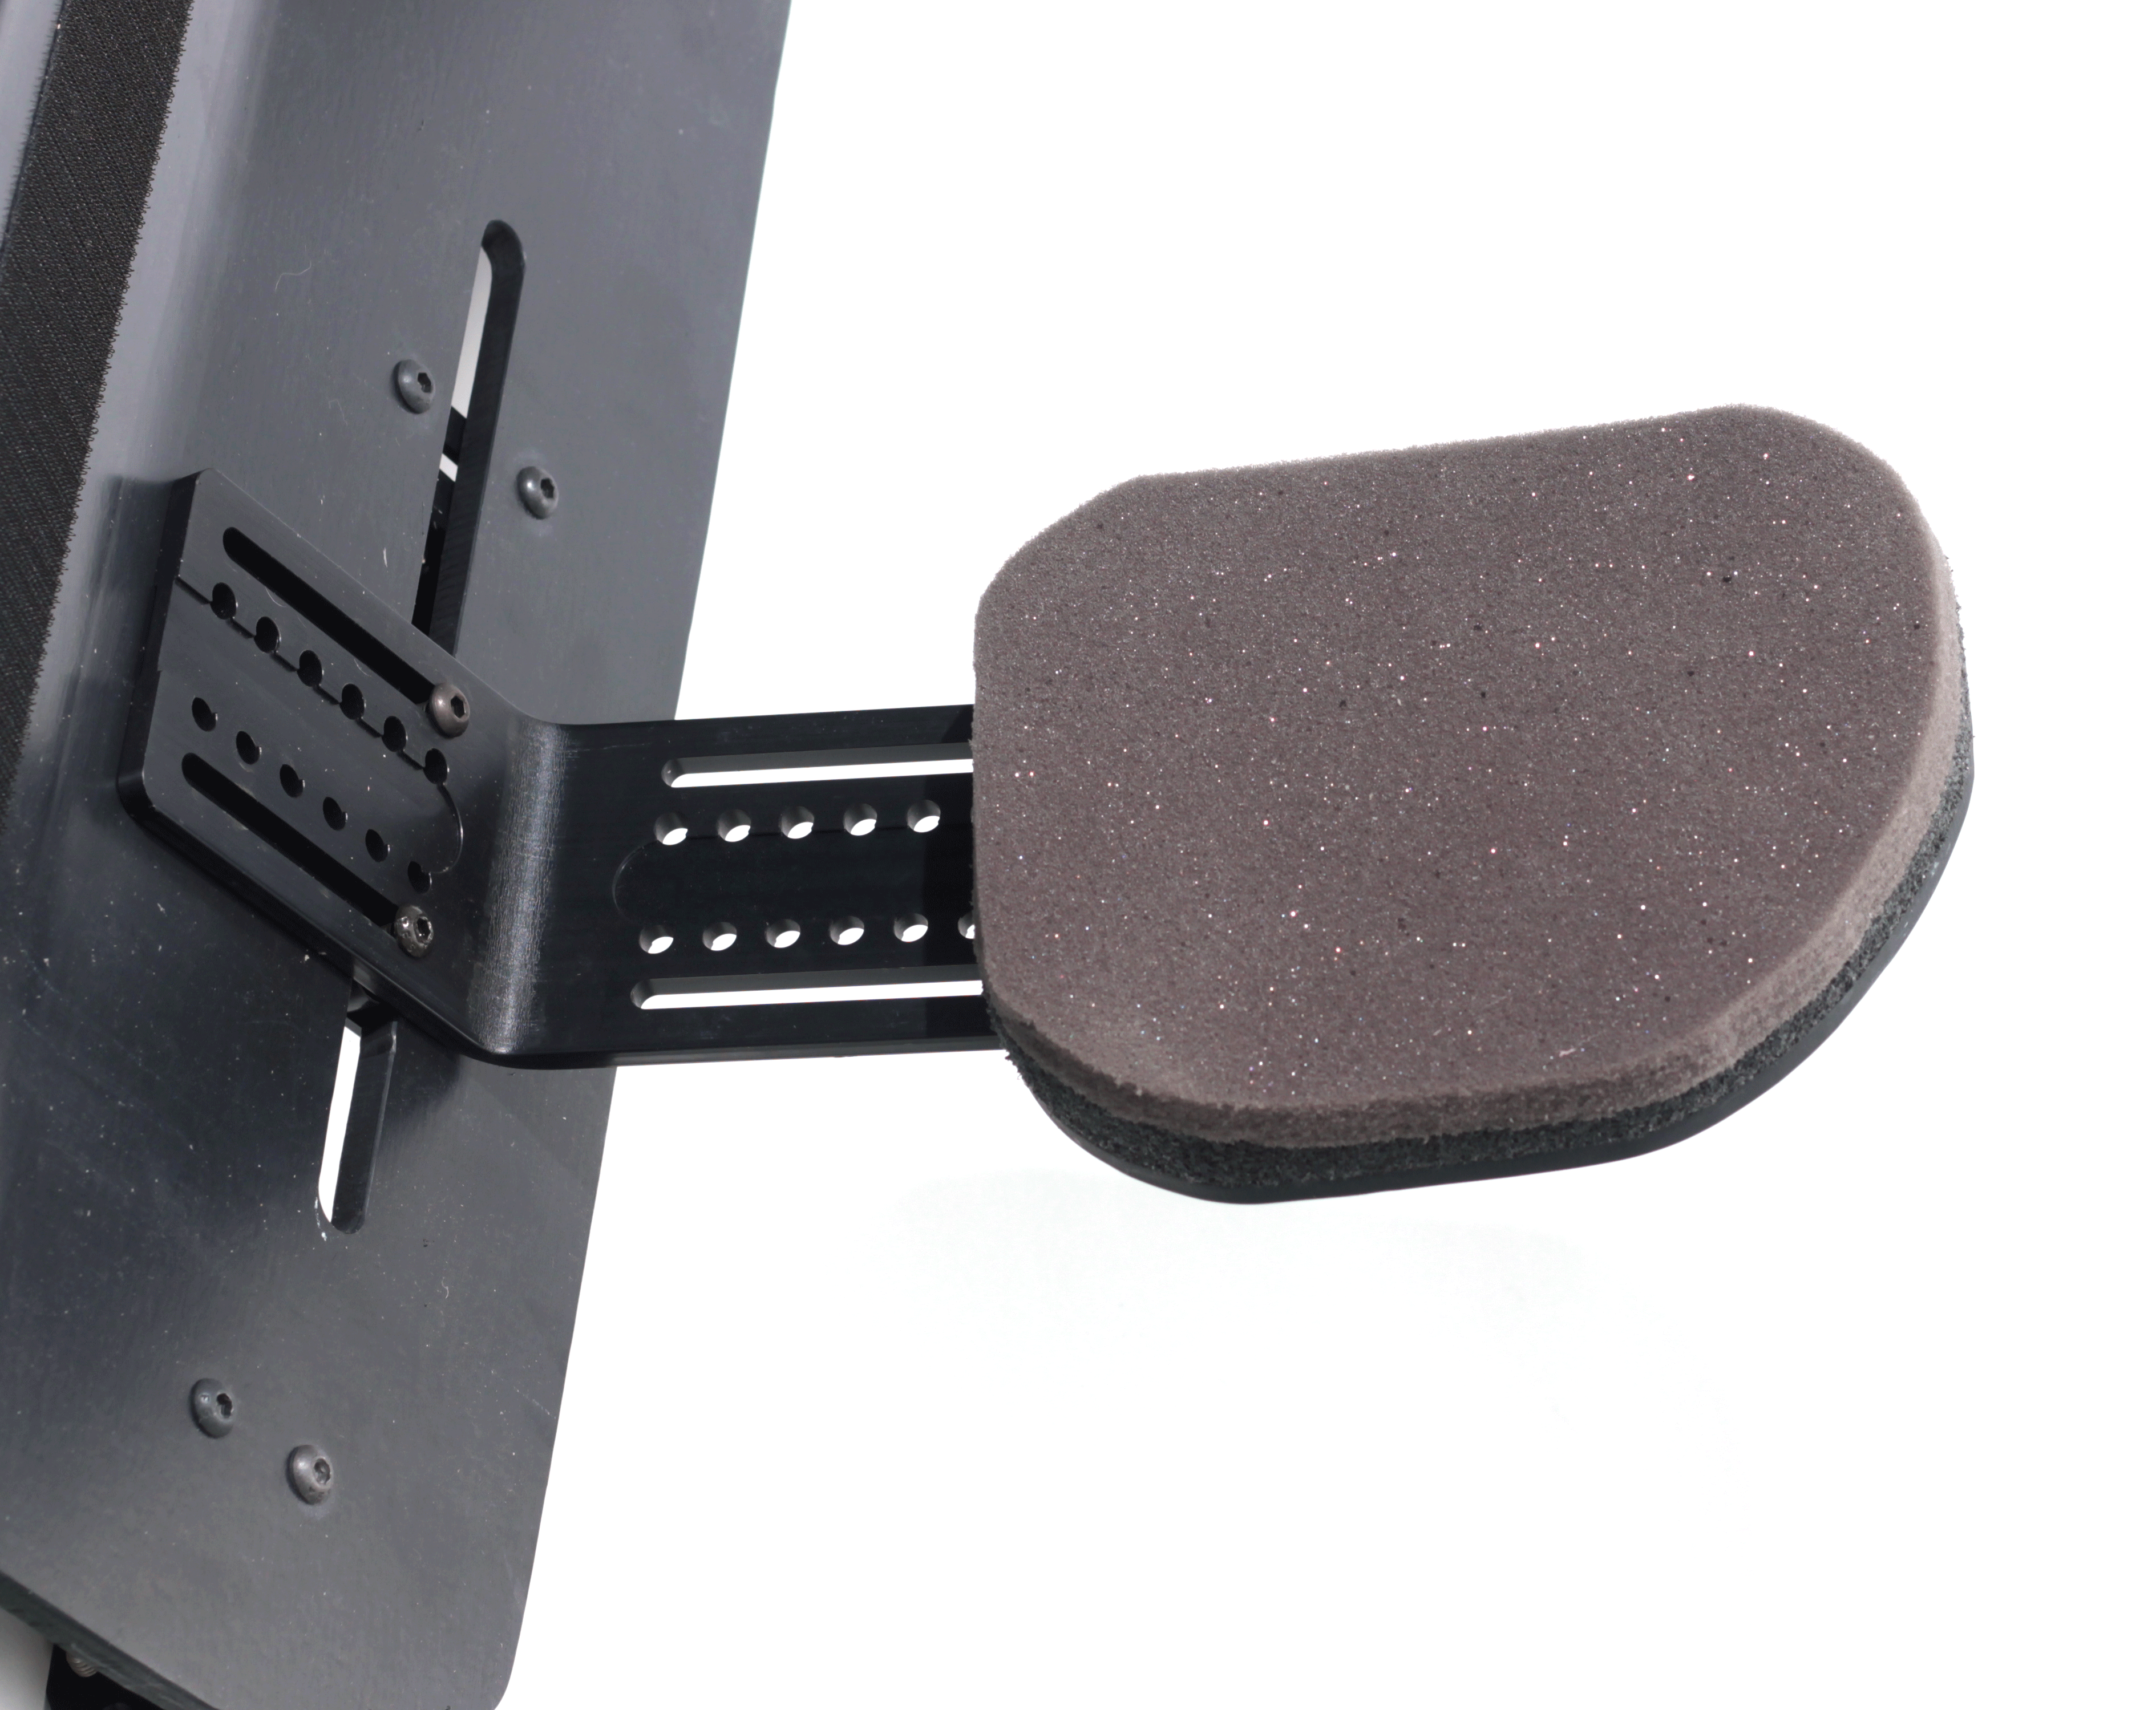 Support bracket allows easy positioning and configuration to a lateral pad